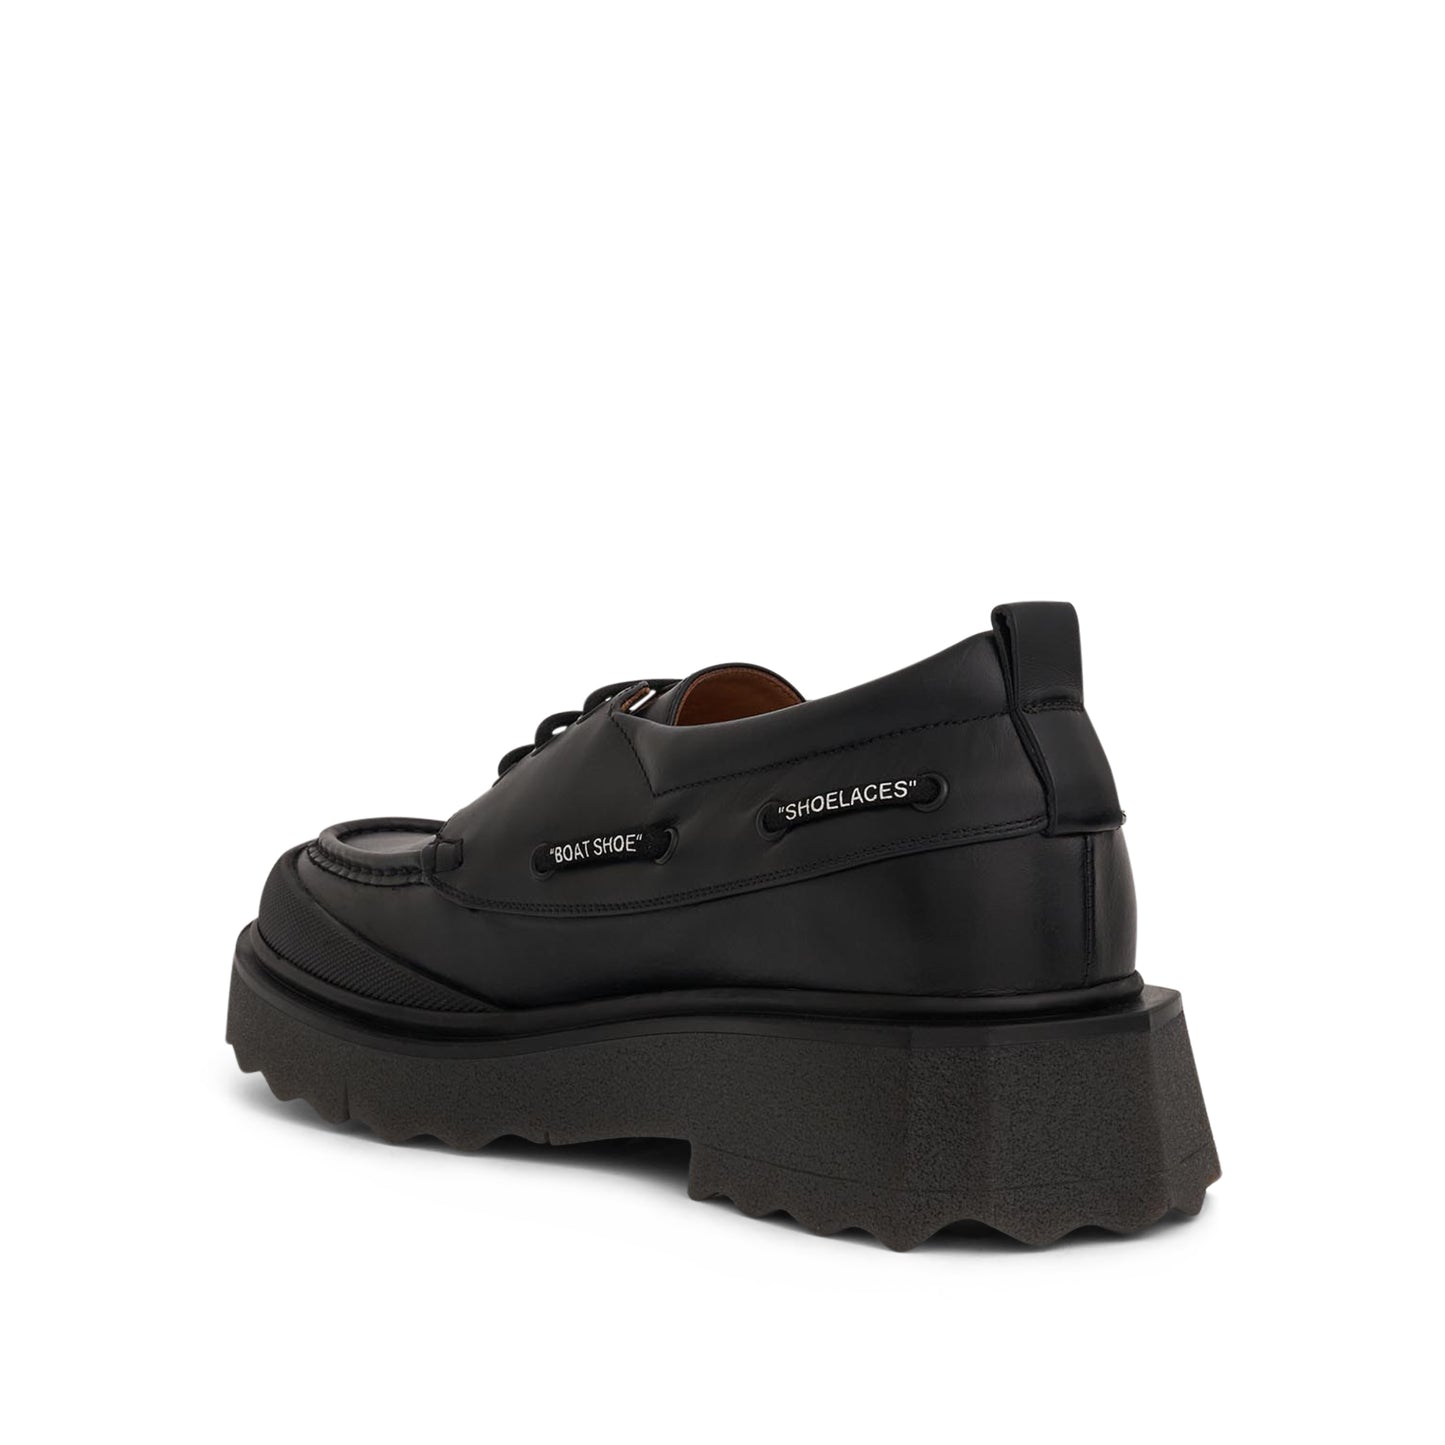 Sponge Leather Boat Shoes in Black/Military